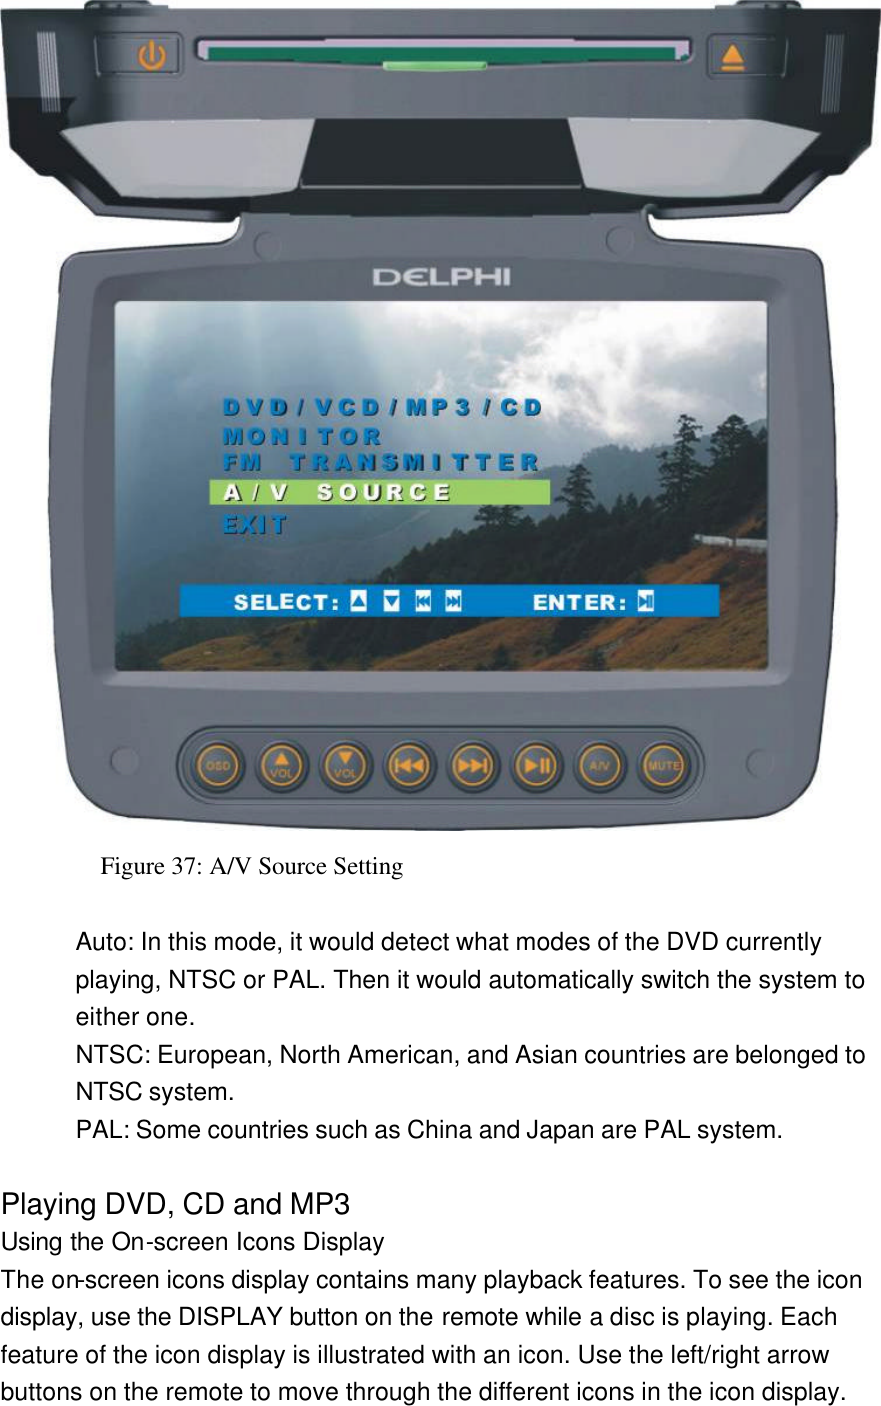  Figure 37: A/V Source Setting  Auto: In this mode, it would detect what modes of the DVD currently playing, NTSC or PAL. Then it would automatically switch the system to either one. NTSC: European, North American, and Asian countries are belonged to NTSC system. PAL: Some countries such as China and Japan are PAL system.  Playing DVD, CD and MP3 Using the On-screen Icons Display The on-screen icons display contains many playback features. To see the icon display, use the DISPLAY button on the remote while a disc is playing. Each feature of the icon display is illustrated with an icon. Use the left/right arrow buttons on the remote to move through the different icons in the icon display. 